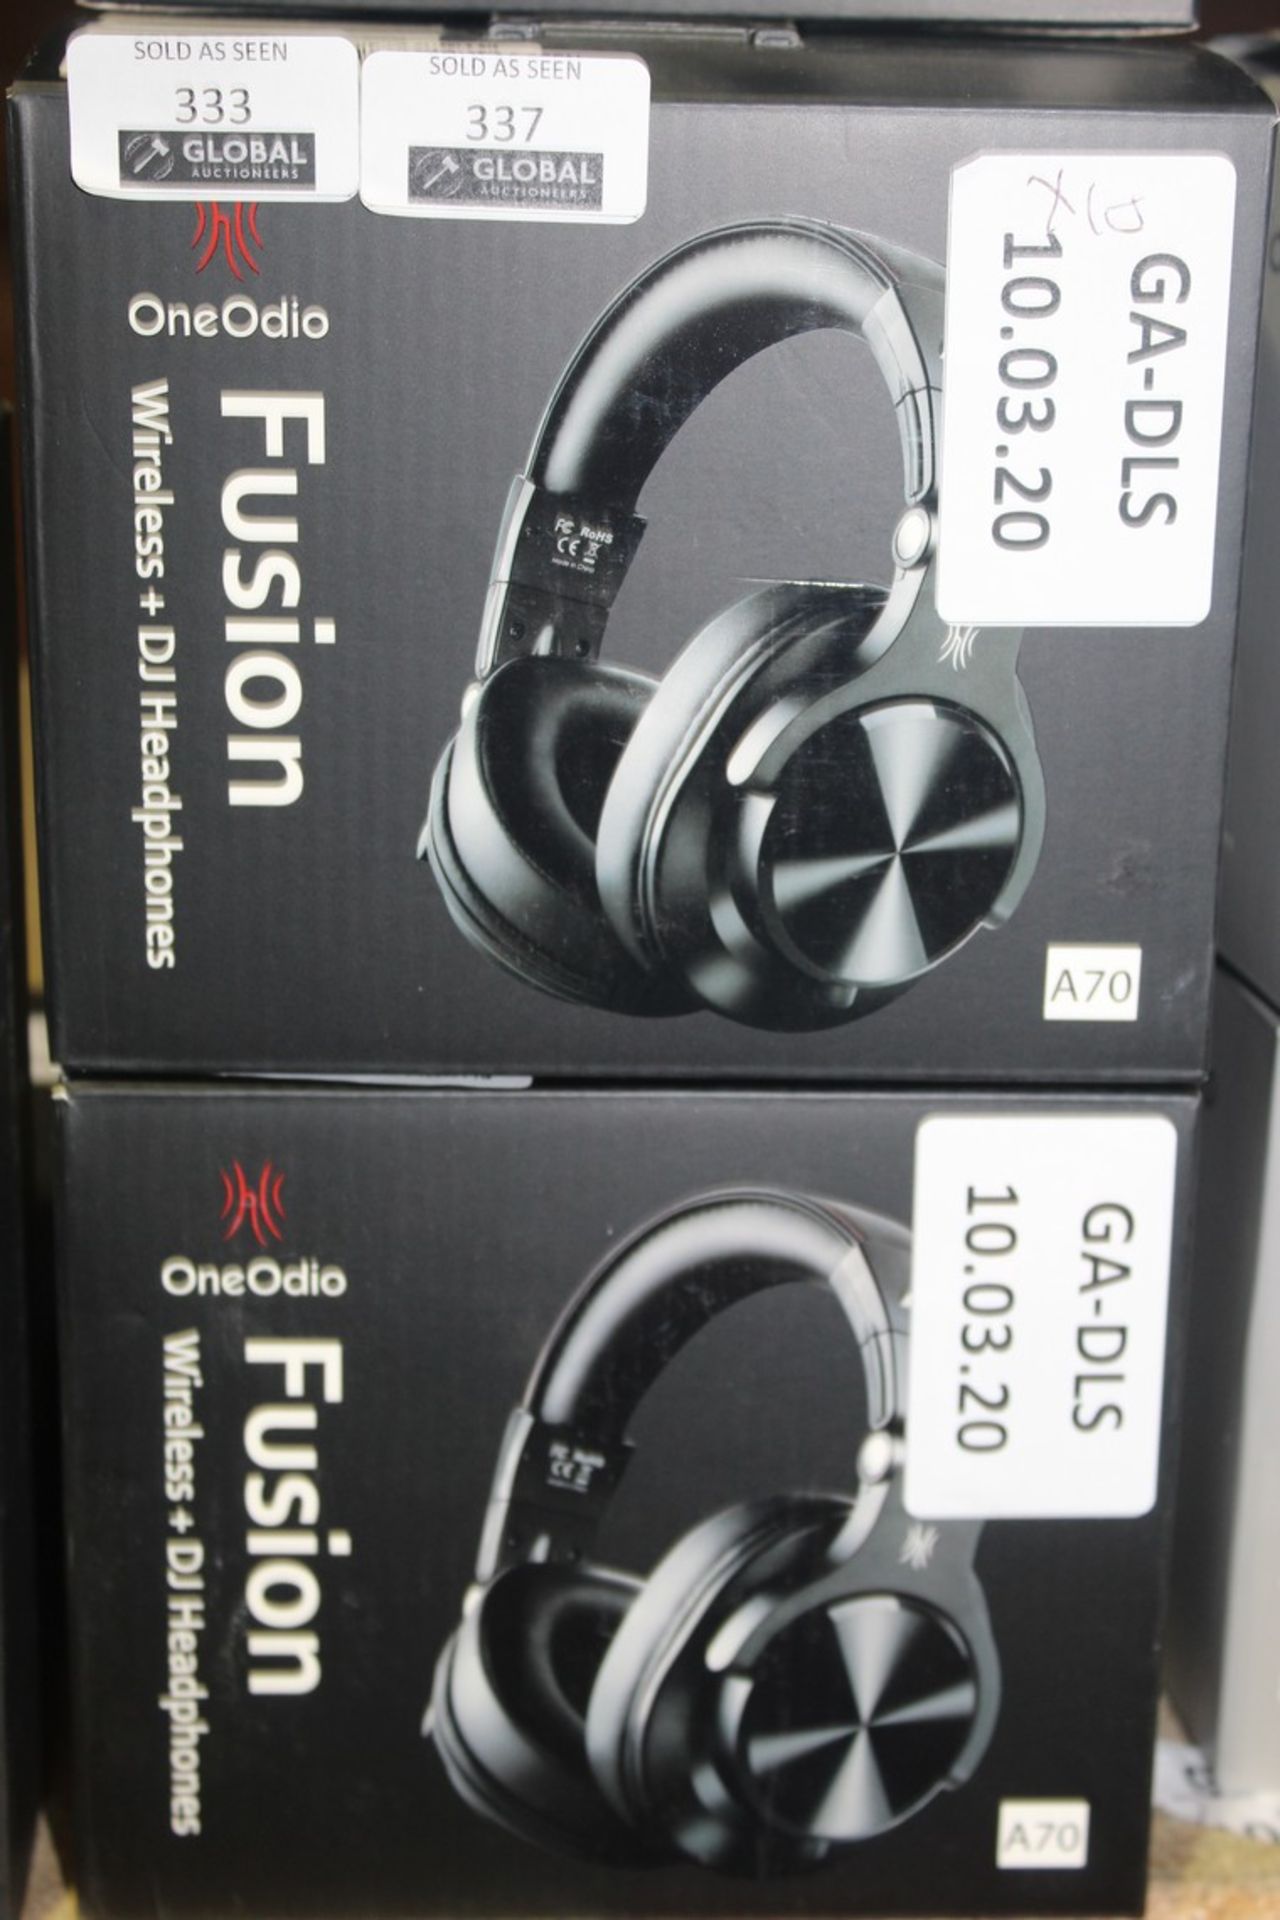 Boxed One Audio Fusion Wireless & DJ Headphones RRP £45 Each (Appraisals Available Upon Request)